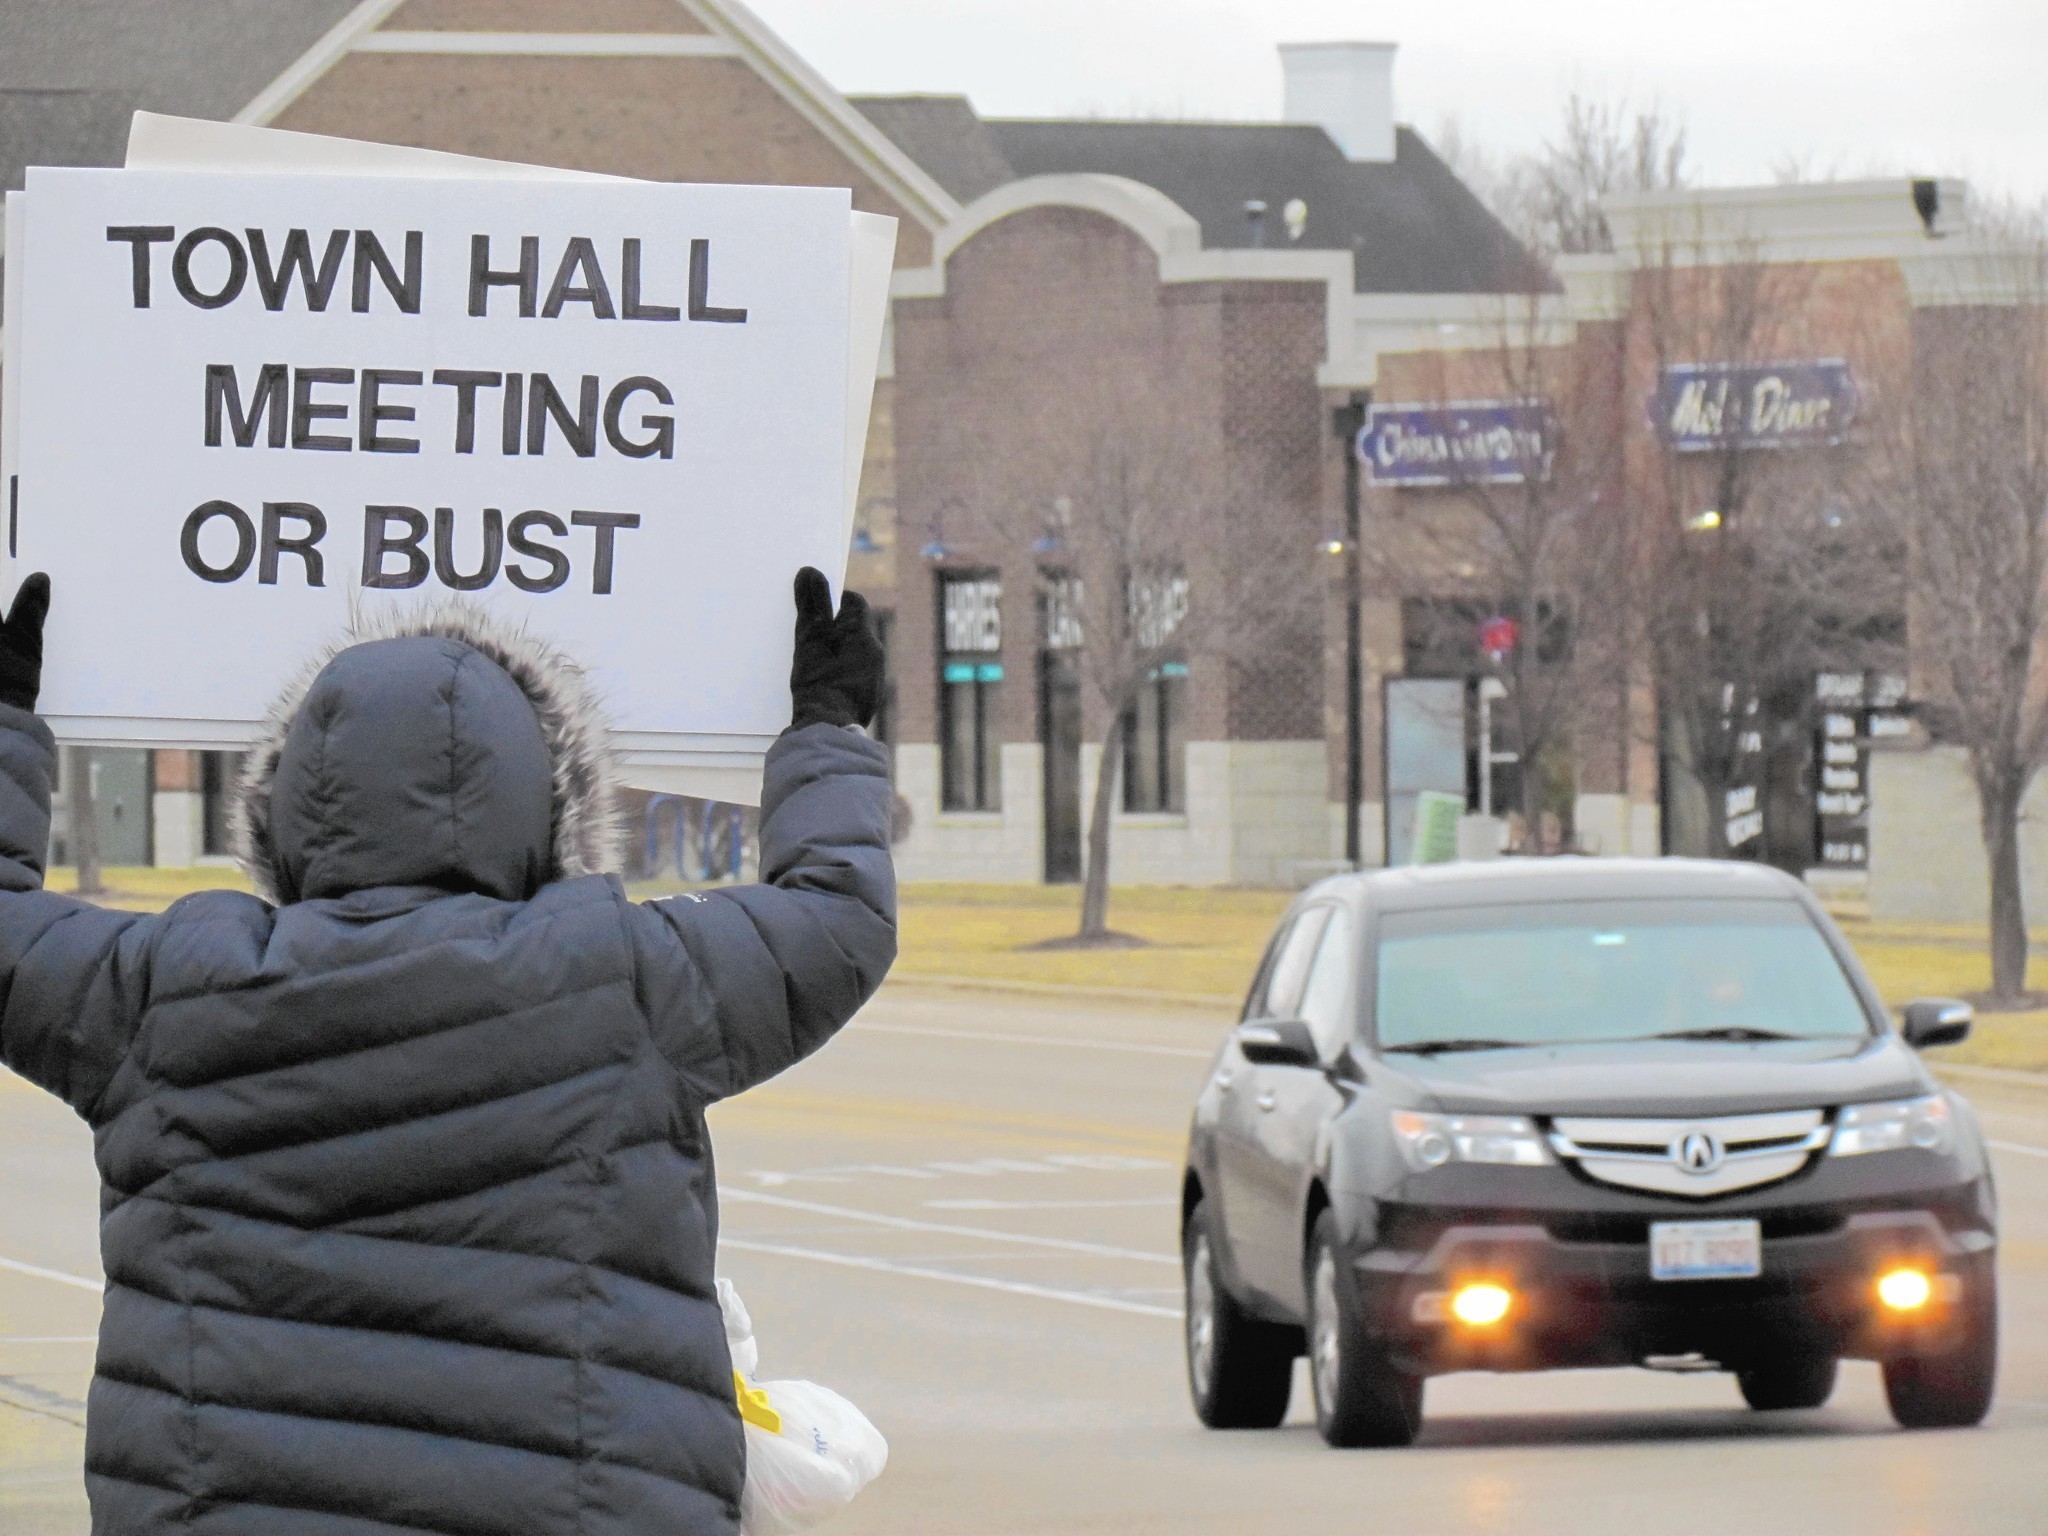 Protesters call for town hall meeting; Hultgren says they follow a 'playbook' to disrupt